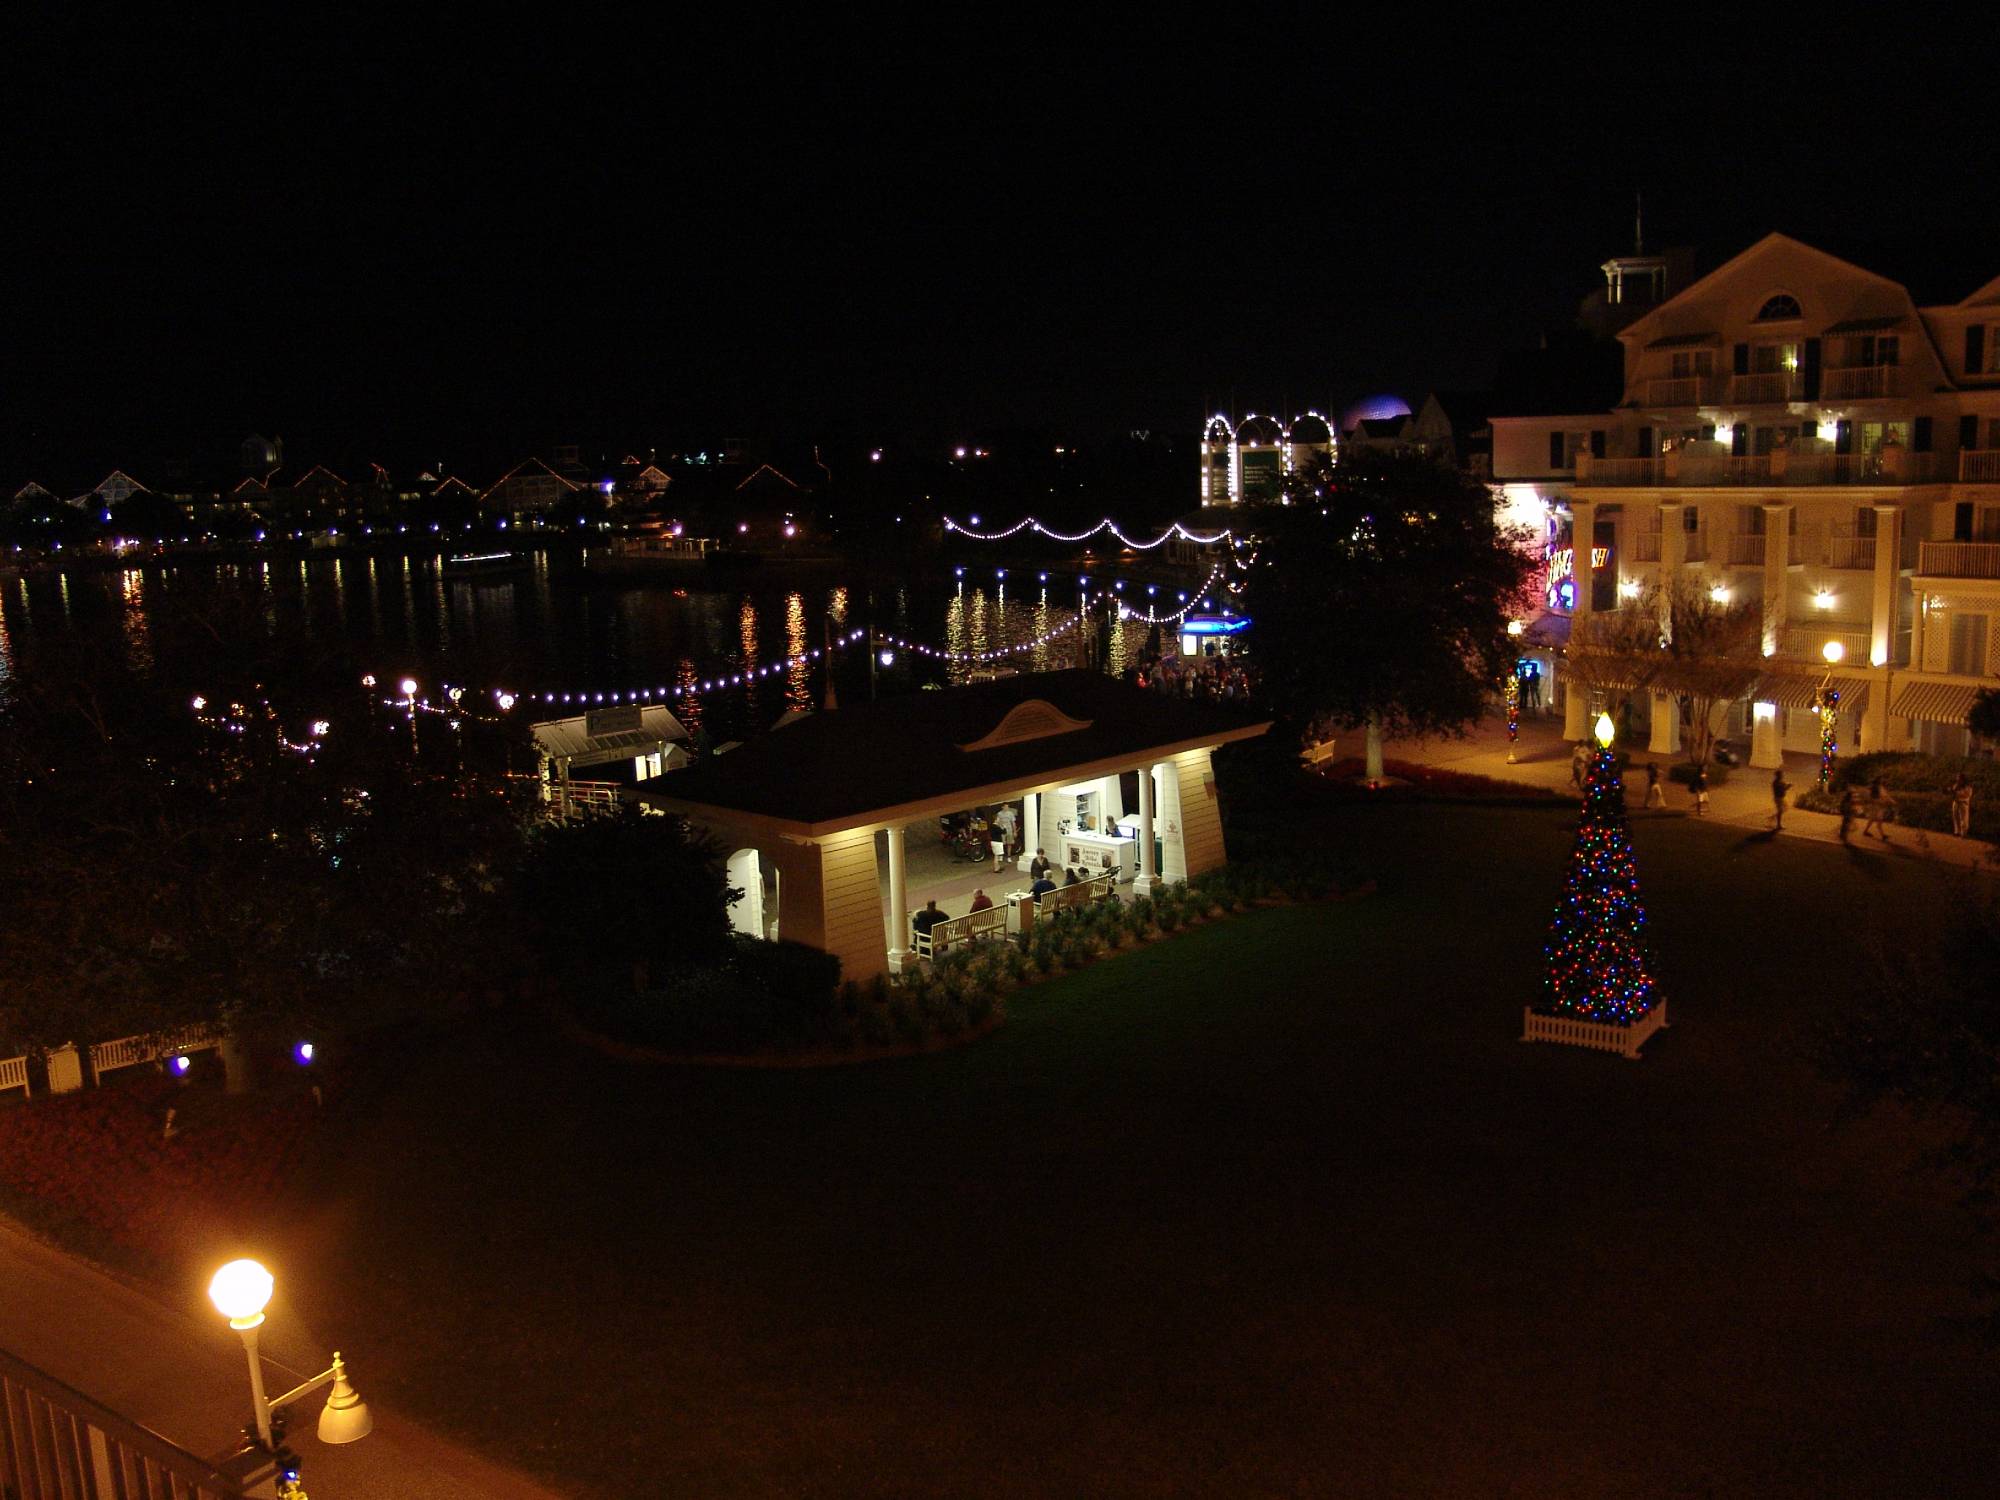 BoardWalk - view over Inn and courtyard at night